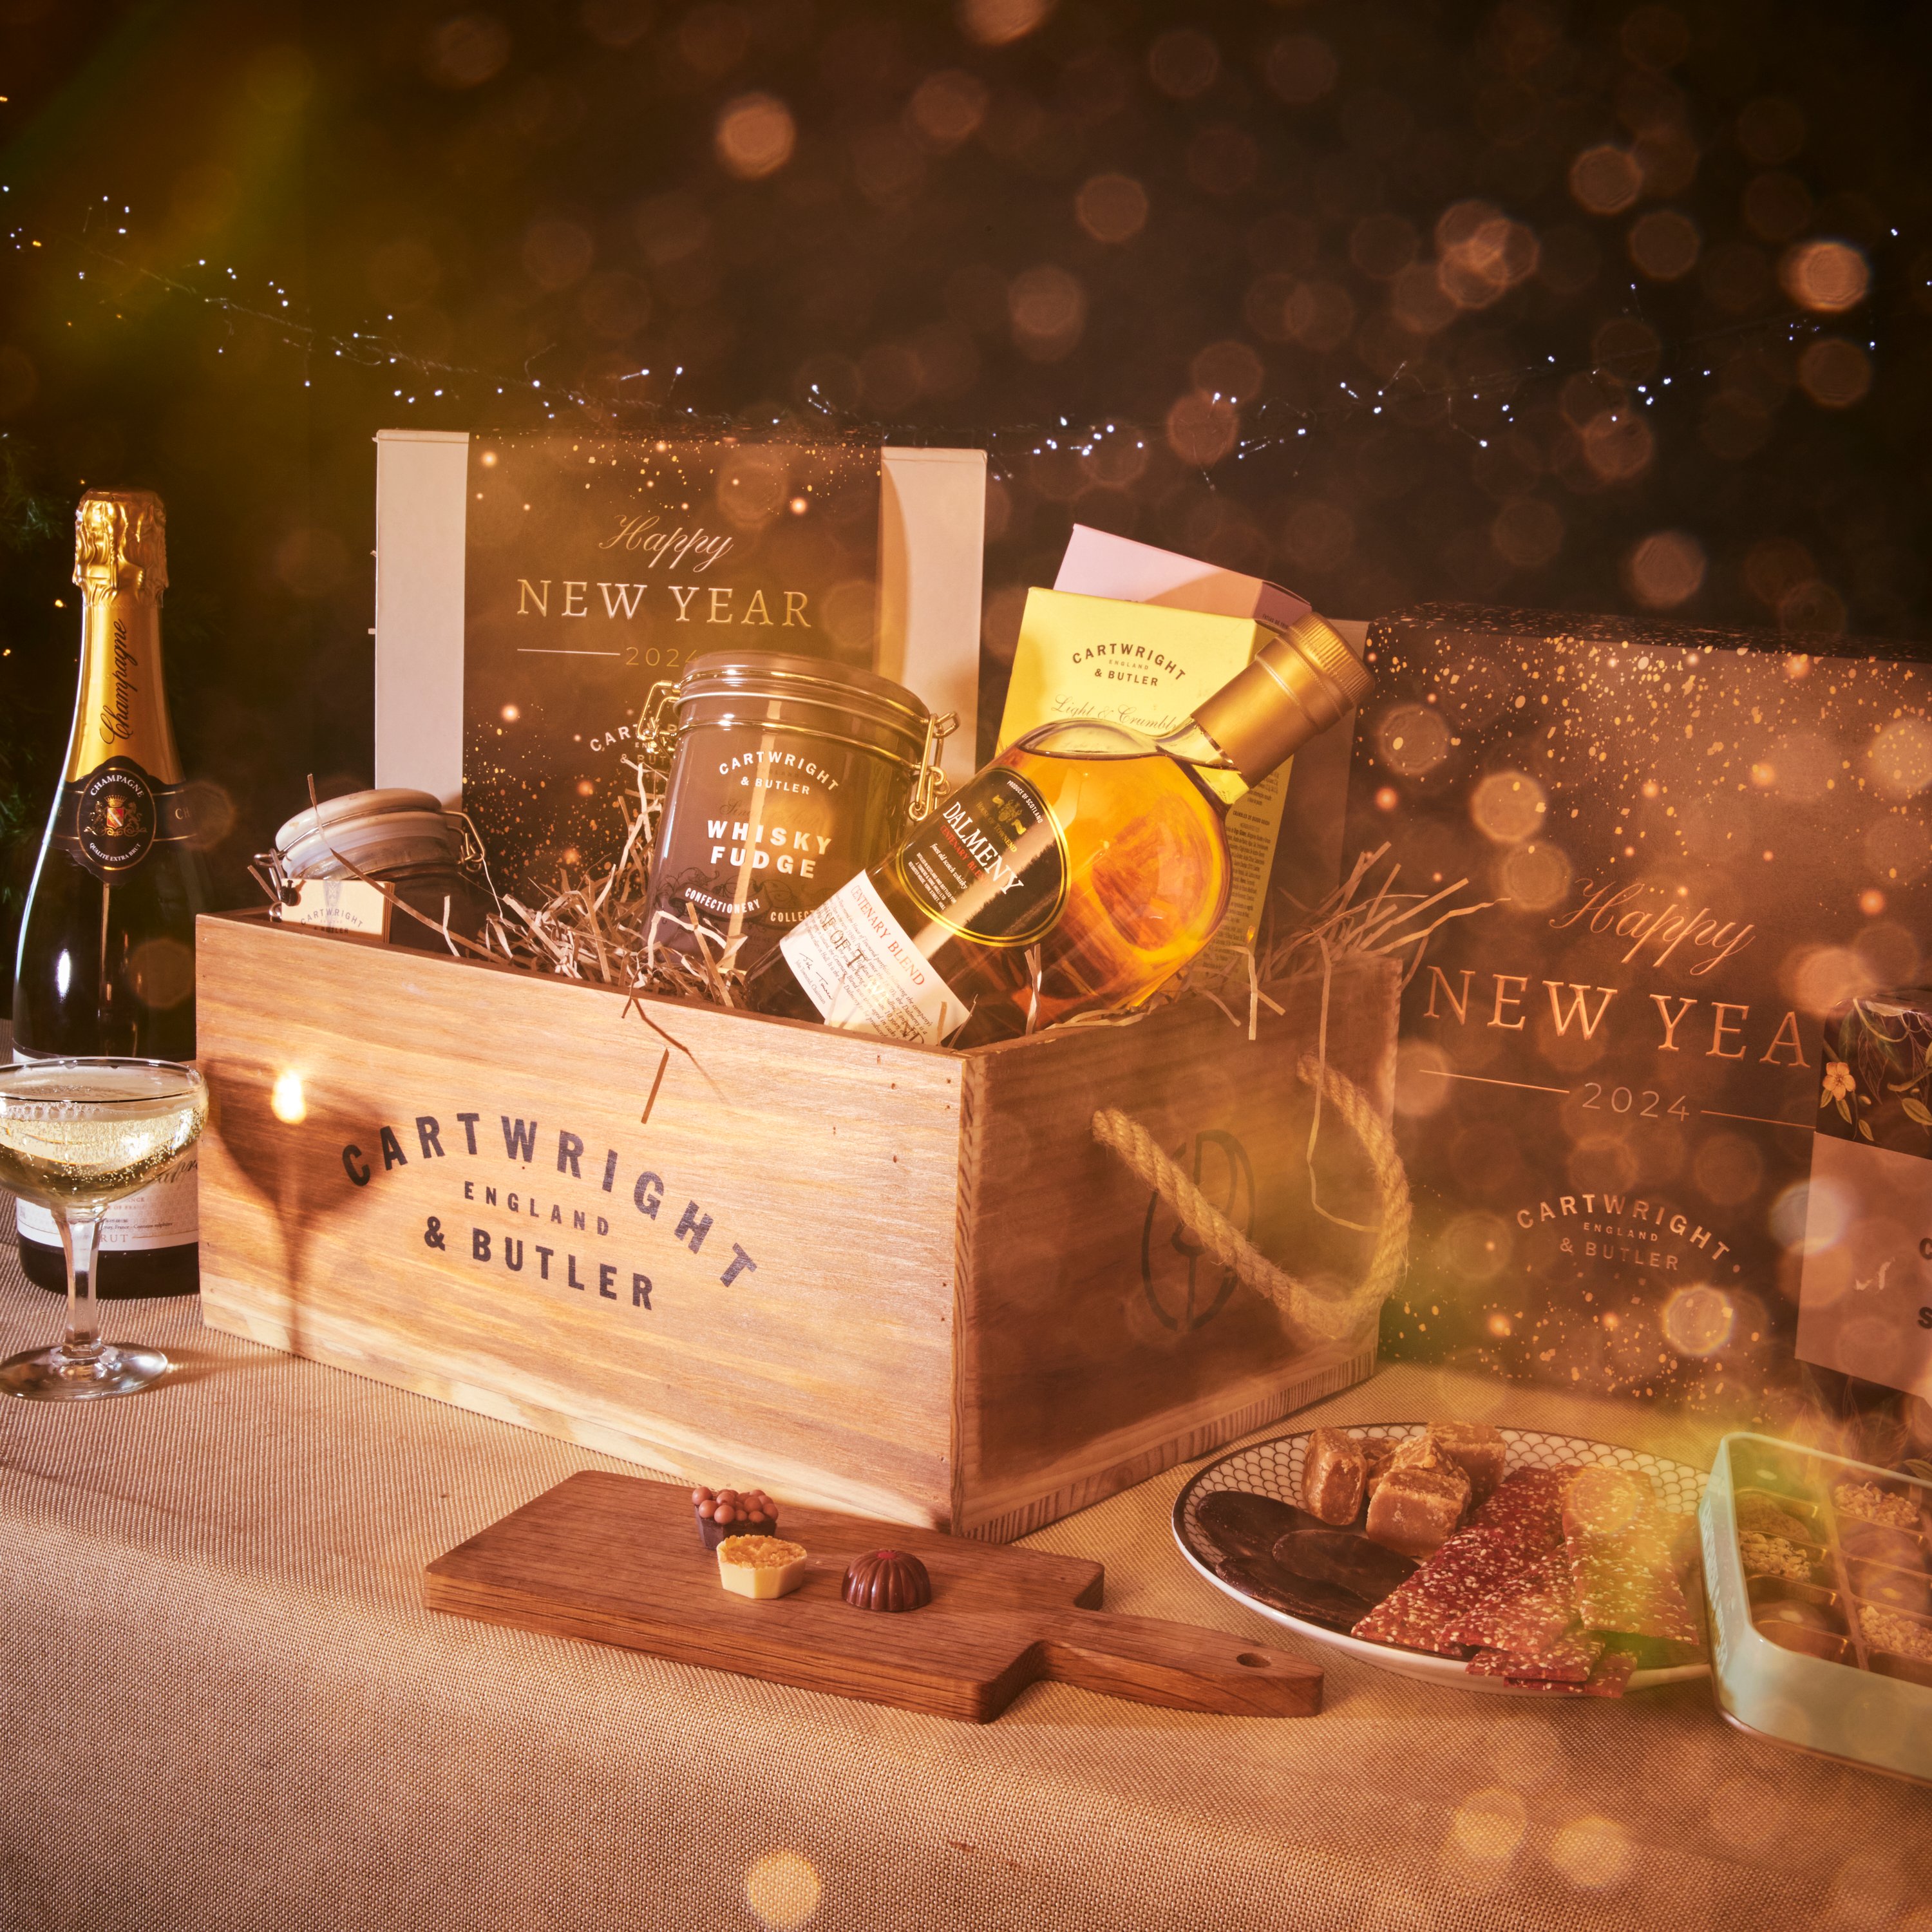 A festive New Year's Eve hamper filled with gourmet treats and a bottle of champagne on a table decorated with lights.